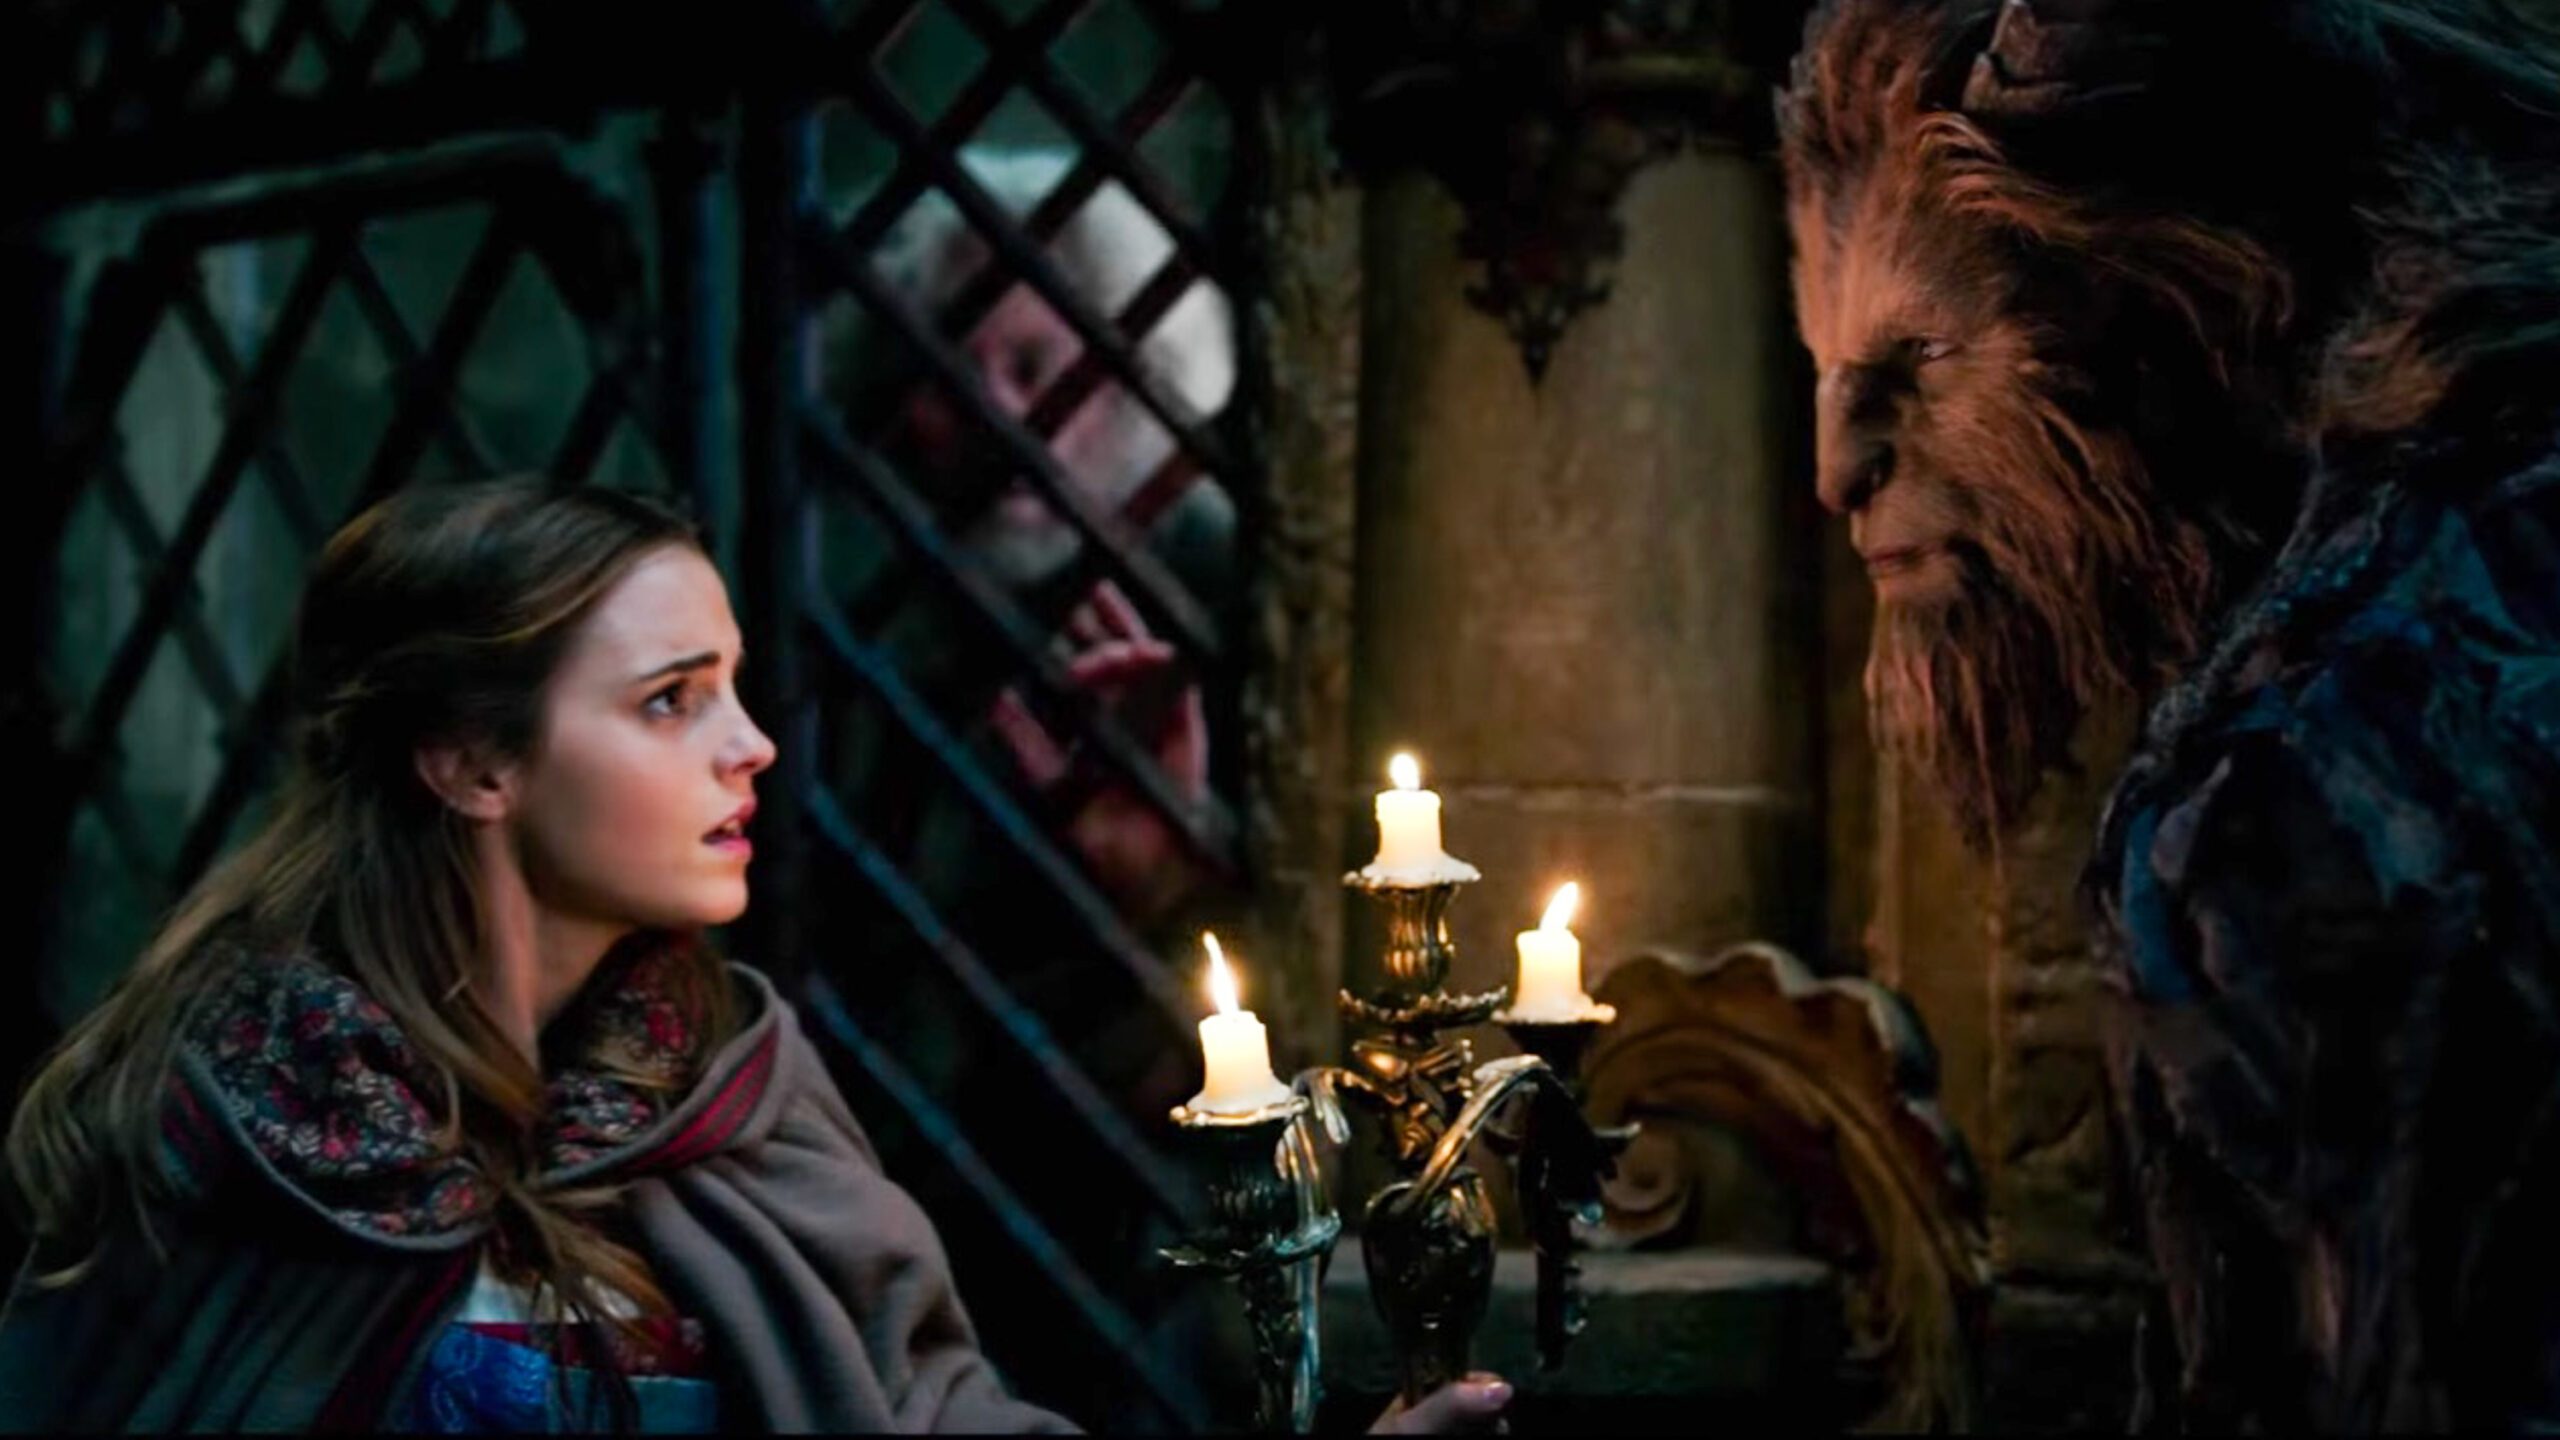 What critics are saying about the new ‘Beauty and the Beast’